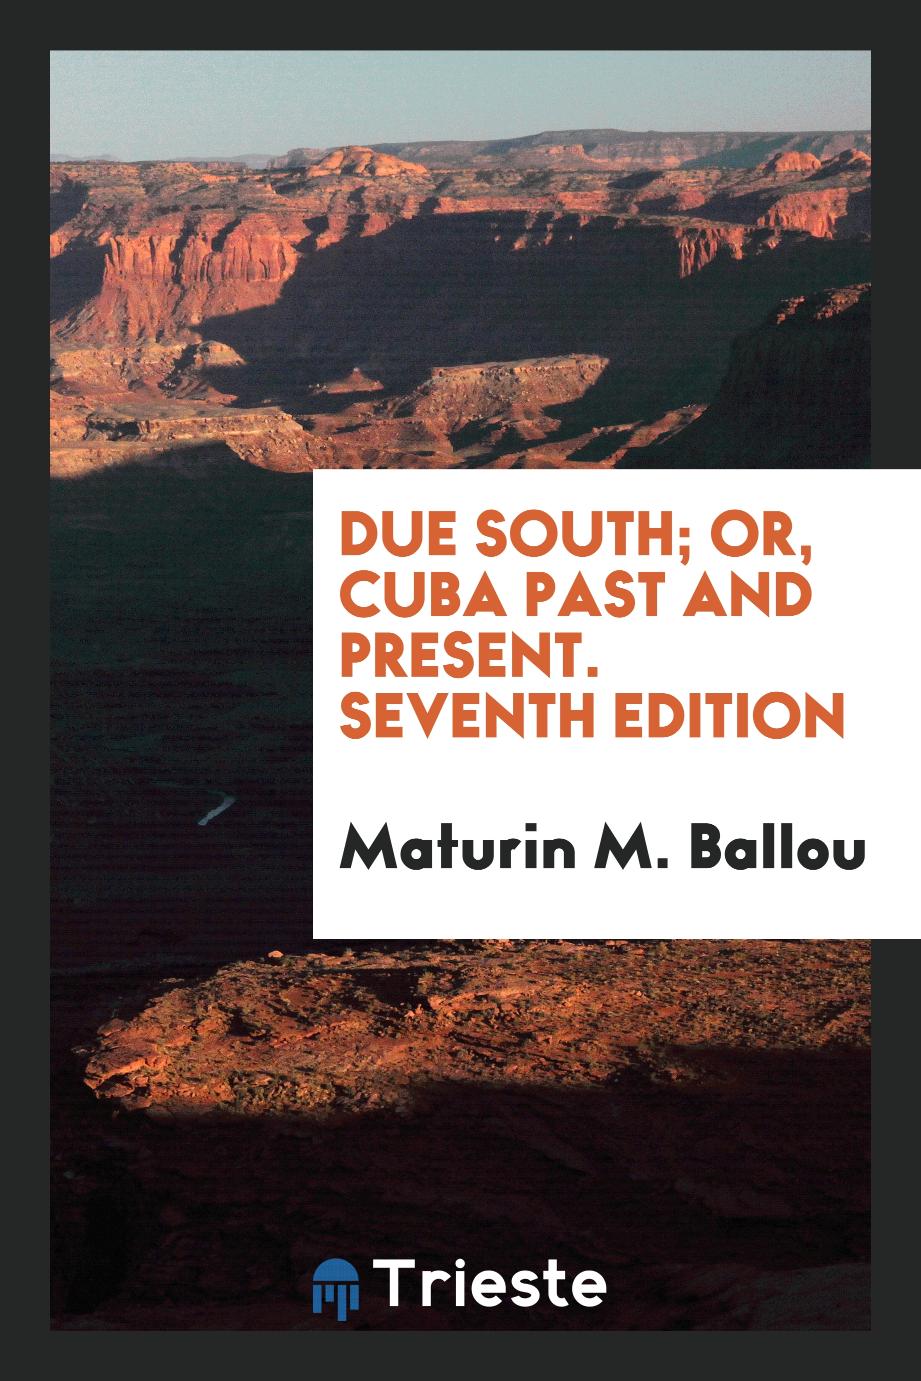 Maturin M. Ballou - Due South; Or, Cuba Past and Present. Seventh Edition